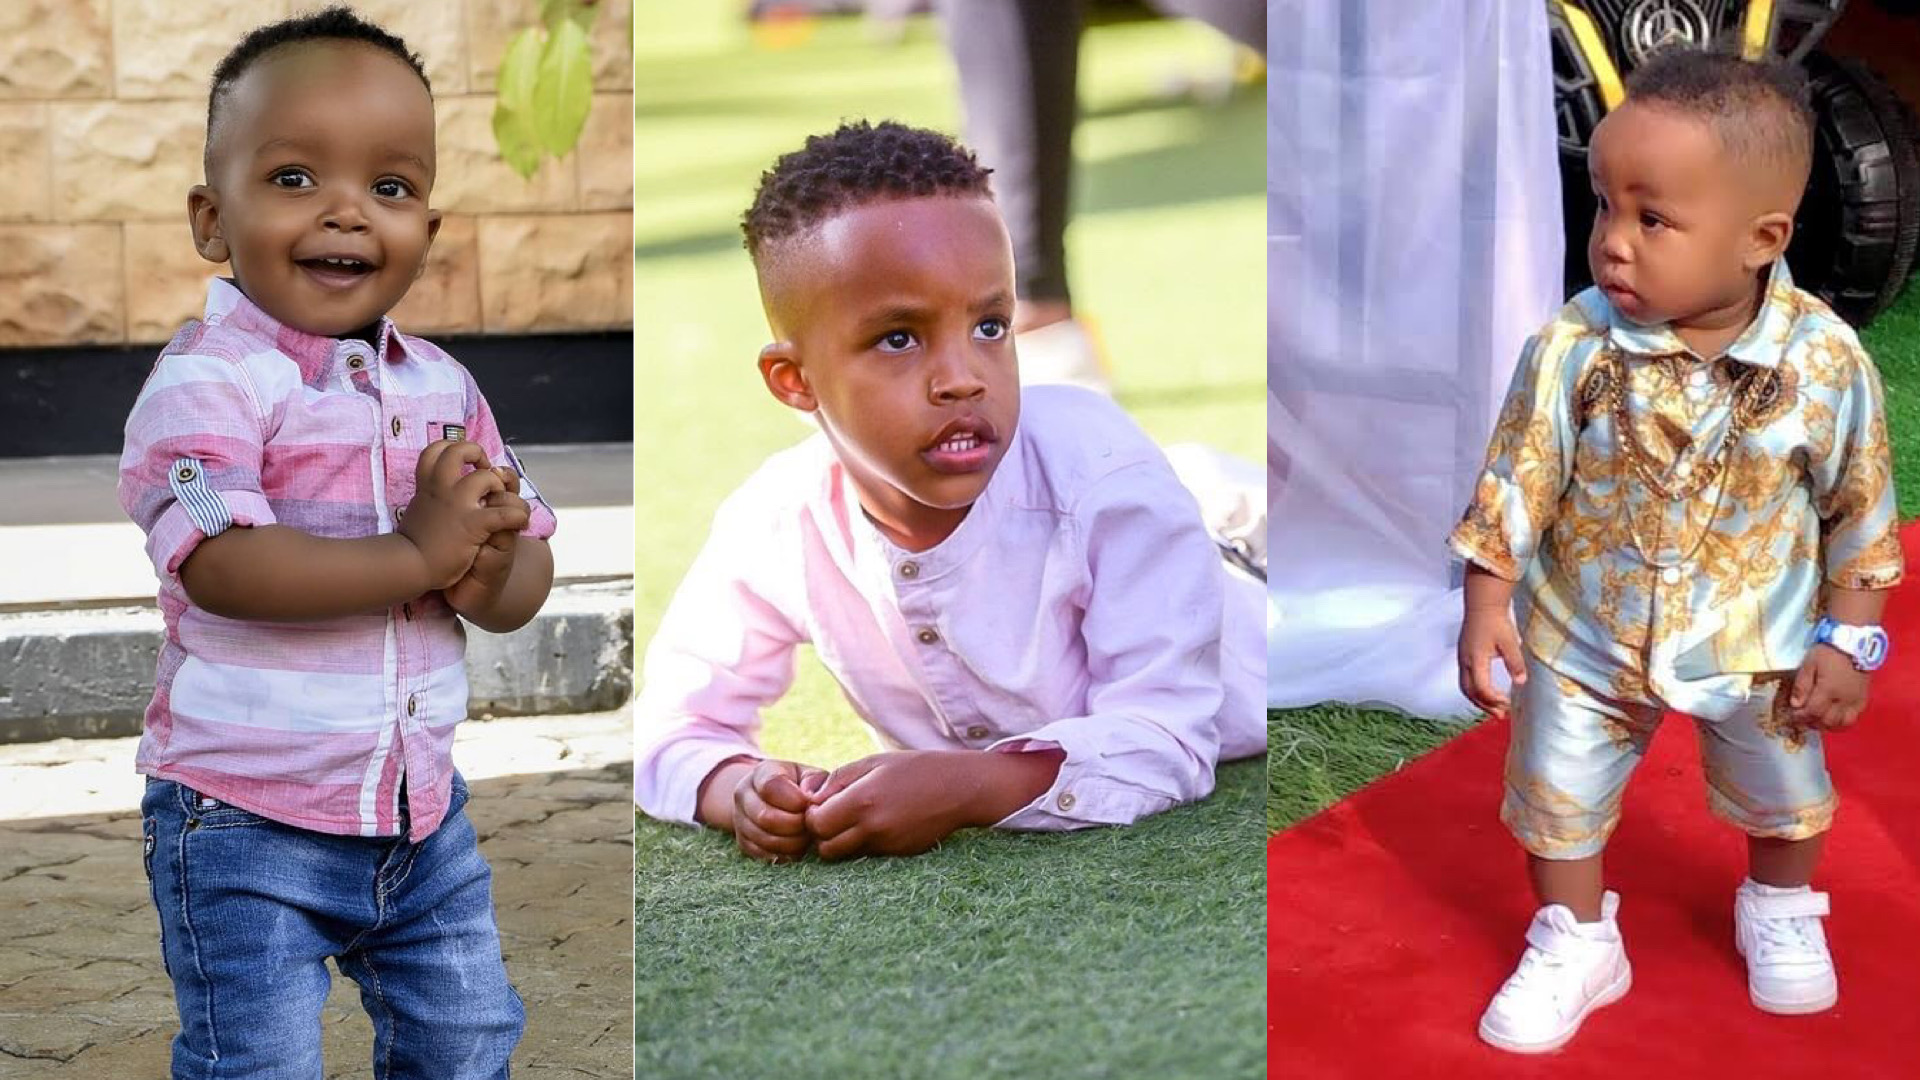 List of celebrity kids turning heads with their fashionable looks (Photos)